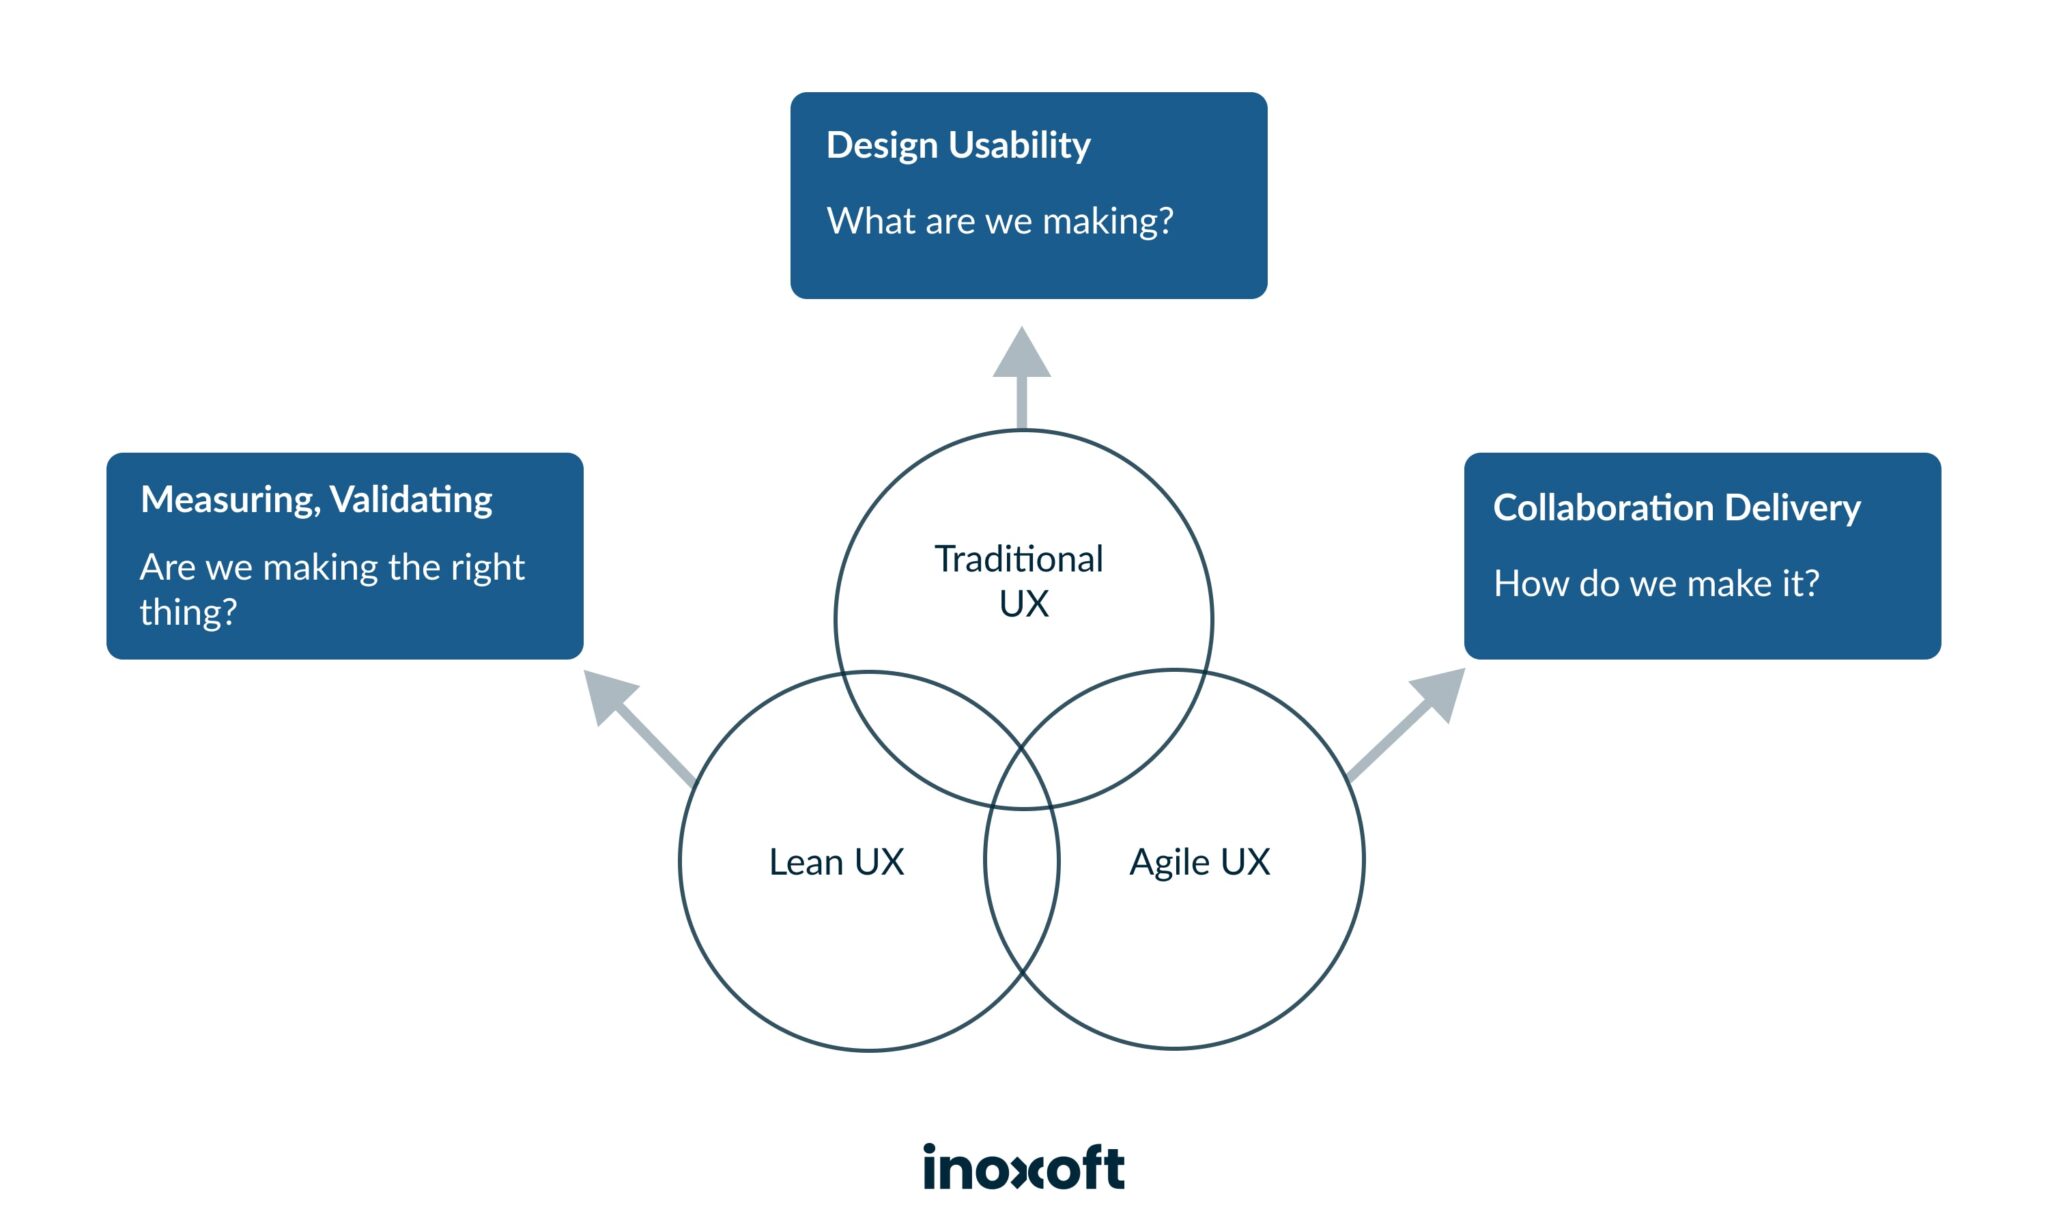 Design Thinking consists of Agile, Lean, and Traditional UX